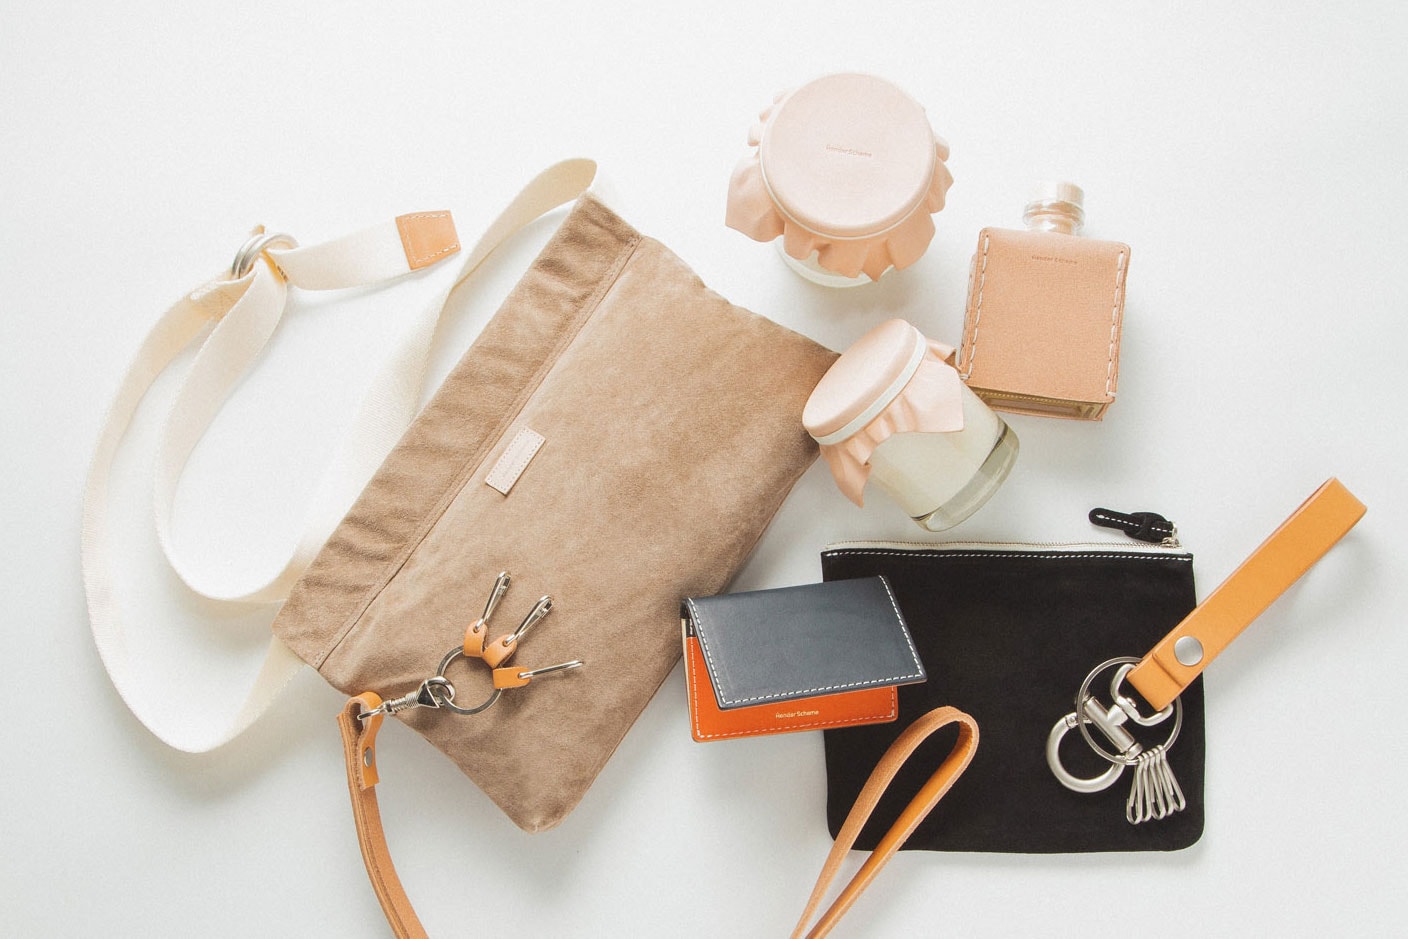 Hender Scheme fall winter 2018 drop deliver flat hbx buy purchase sale store july 20 2018 delivery tan raw leather keyring bag necklace candle diffuser